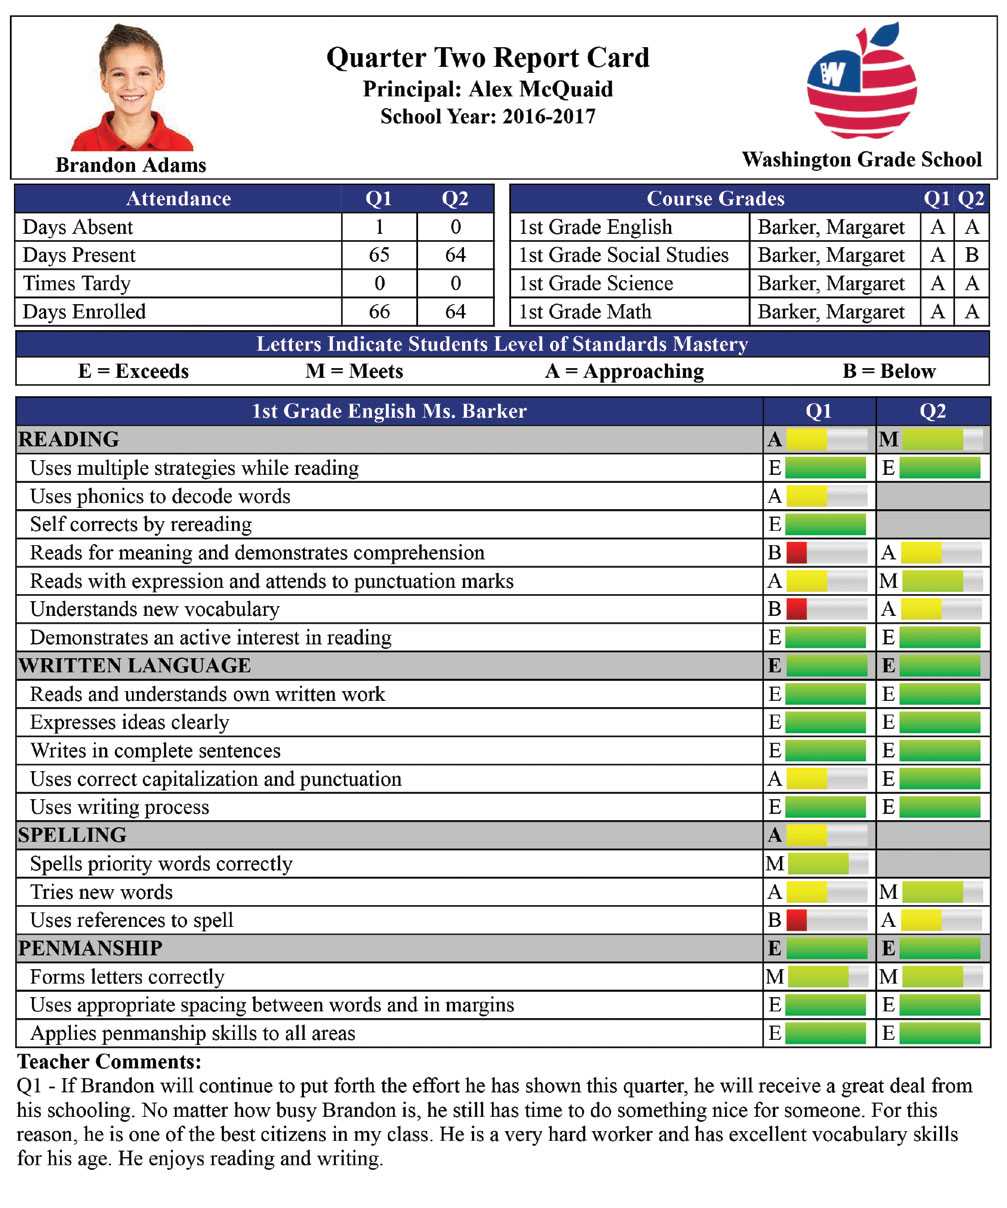 Report Card Creator Plugin For Powerschool Sis - From Mba With Regard To Powerschool Reports Templates